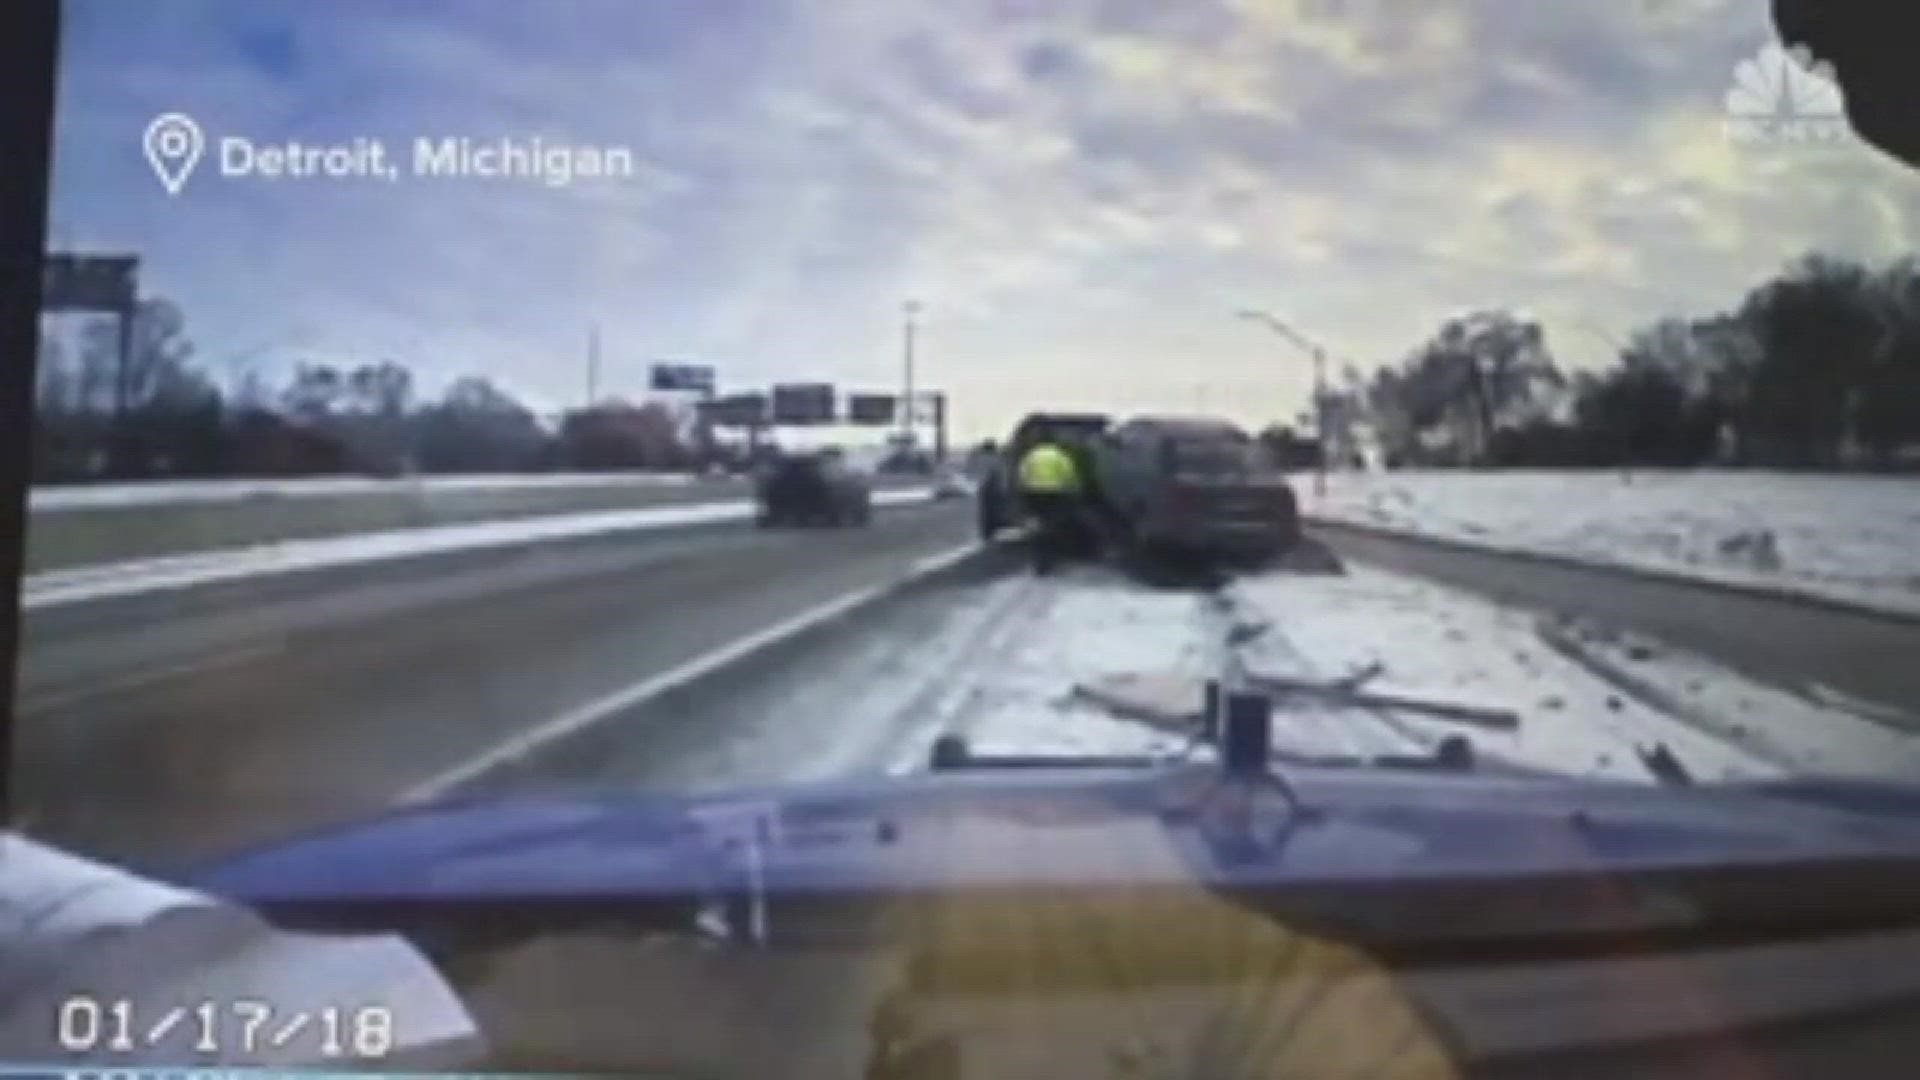 Michigan State Police dashcam showed a truck operator running to avoid being hit by a car.